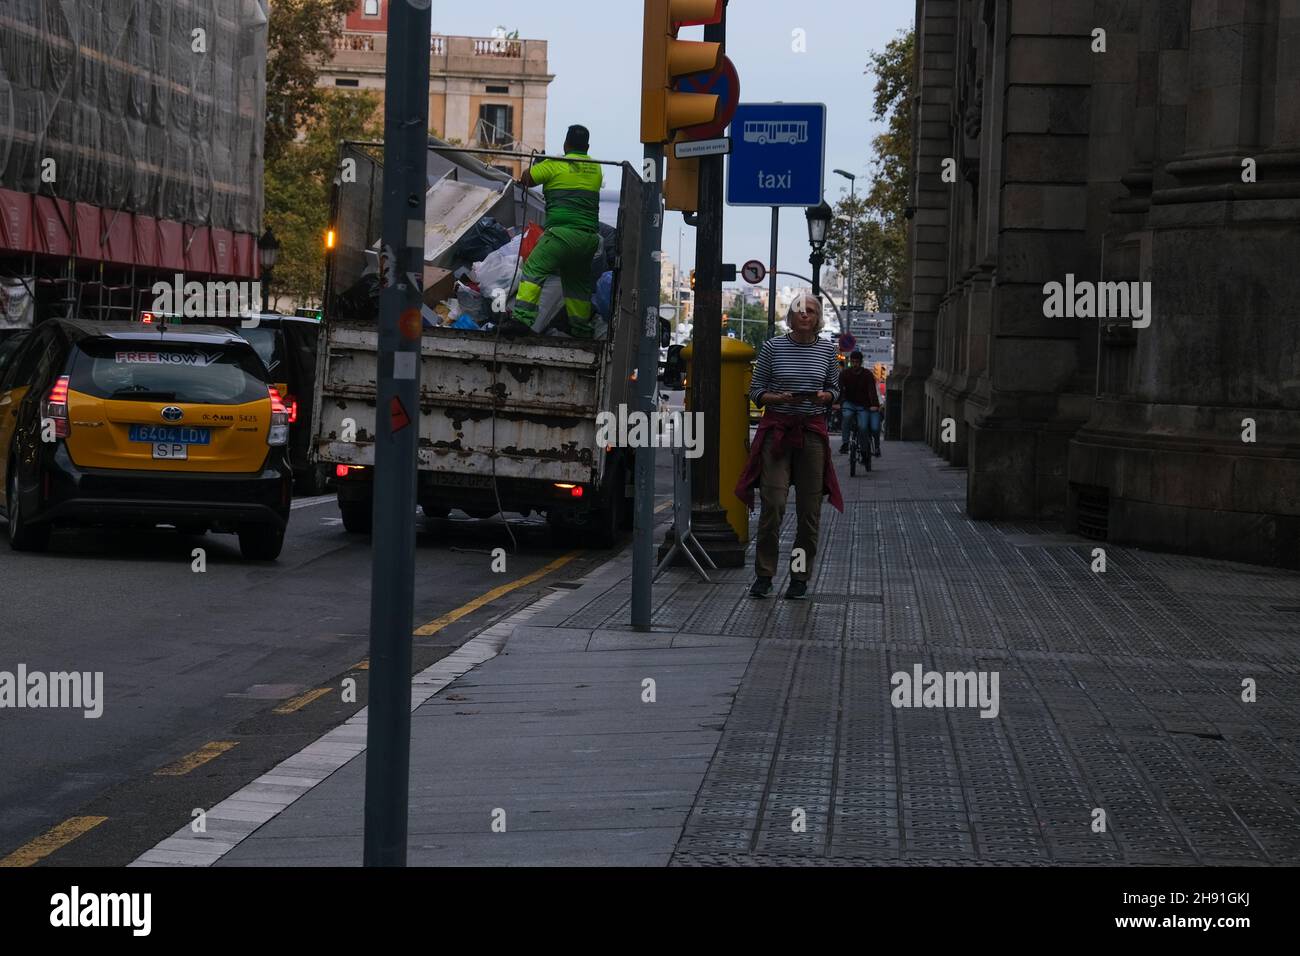 Barcelona, Spain - 5 November 2021: Garbage truck on street, workers throw out garbage, Illustrative Editorial. Stock Photo